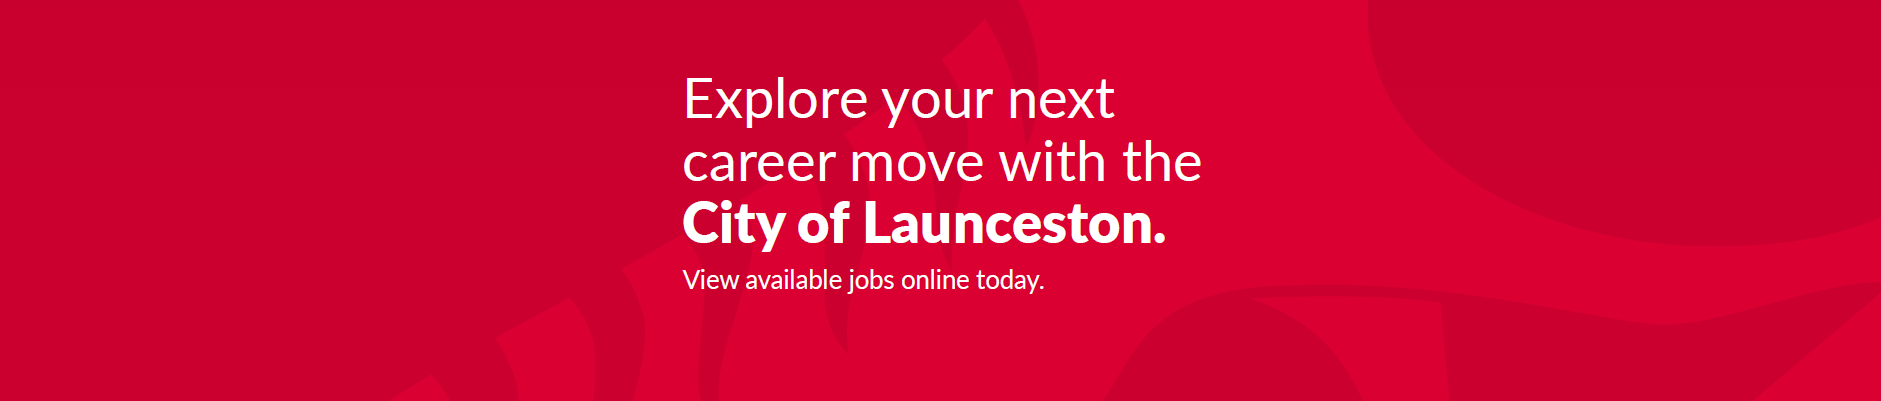 Careers with the City of Launceston